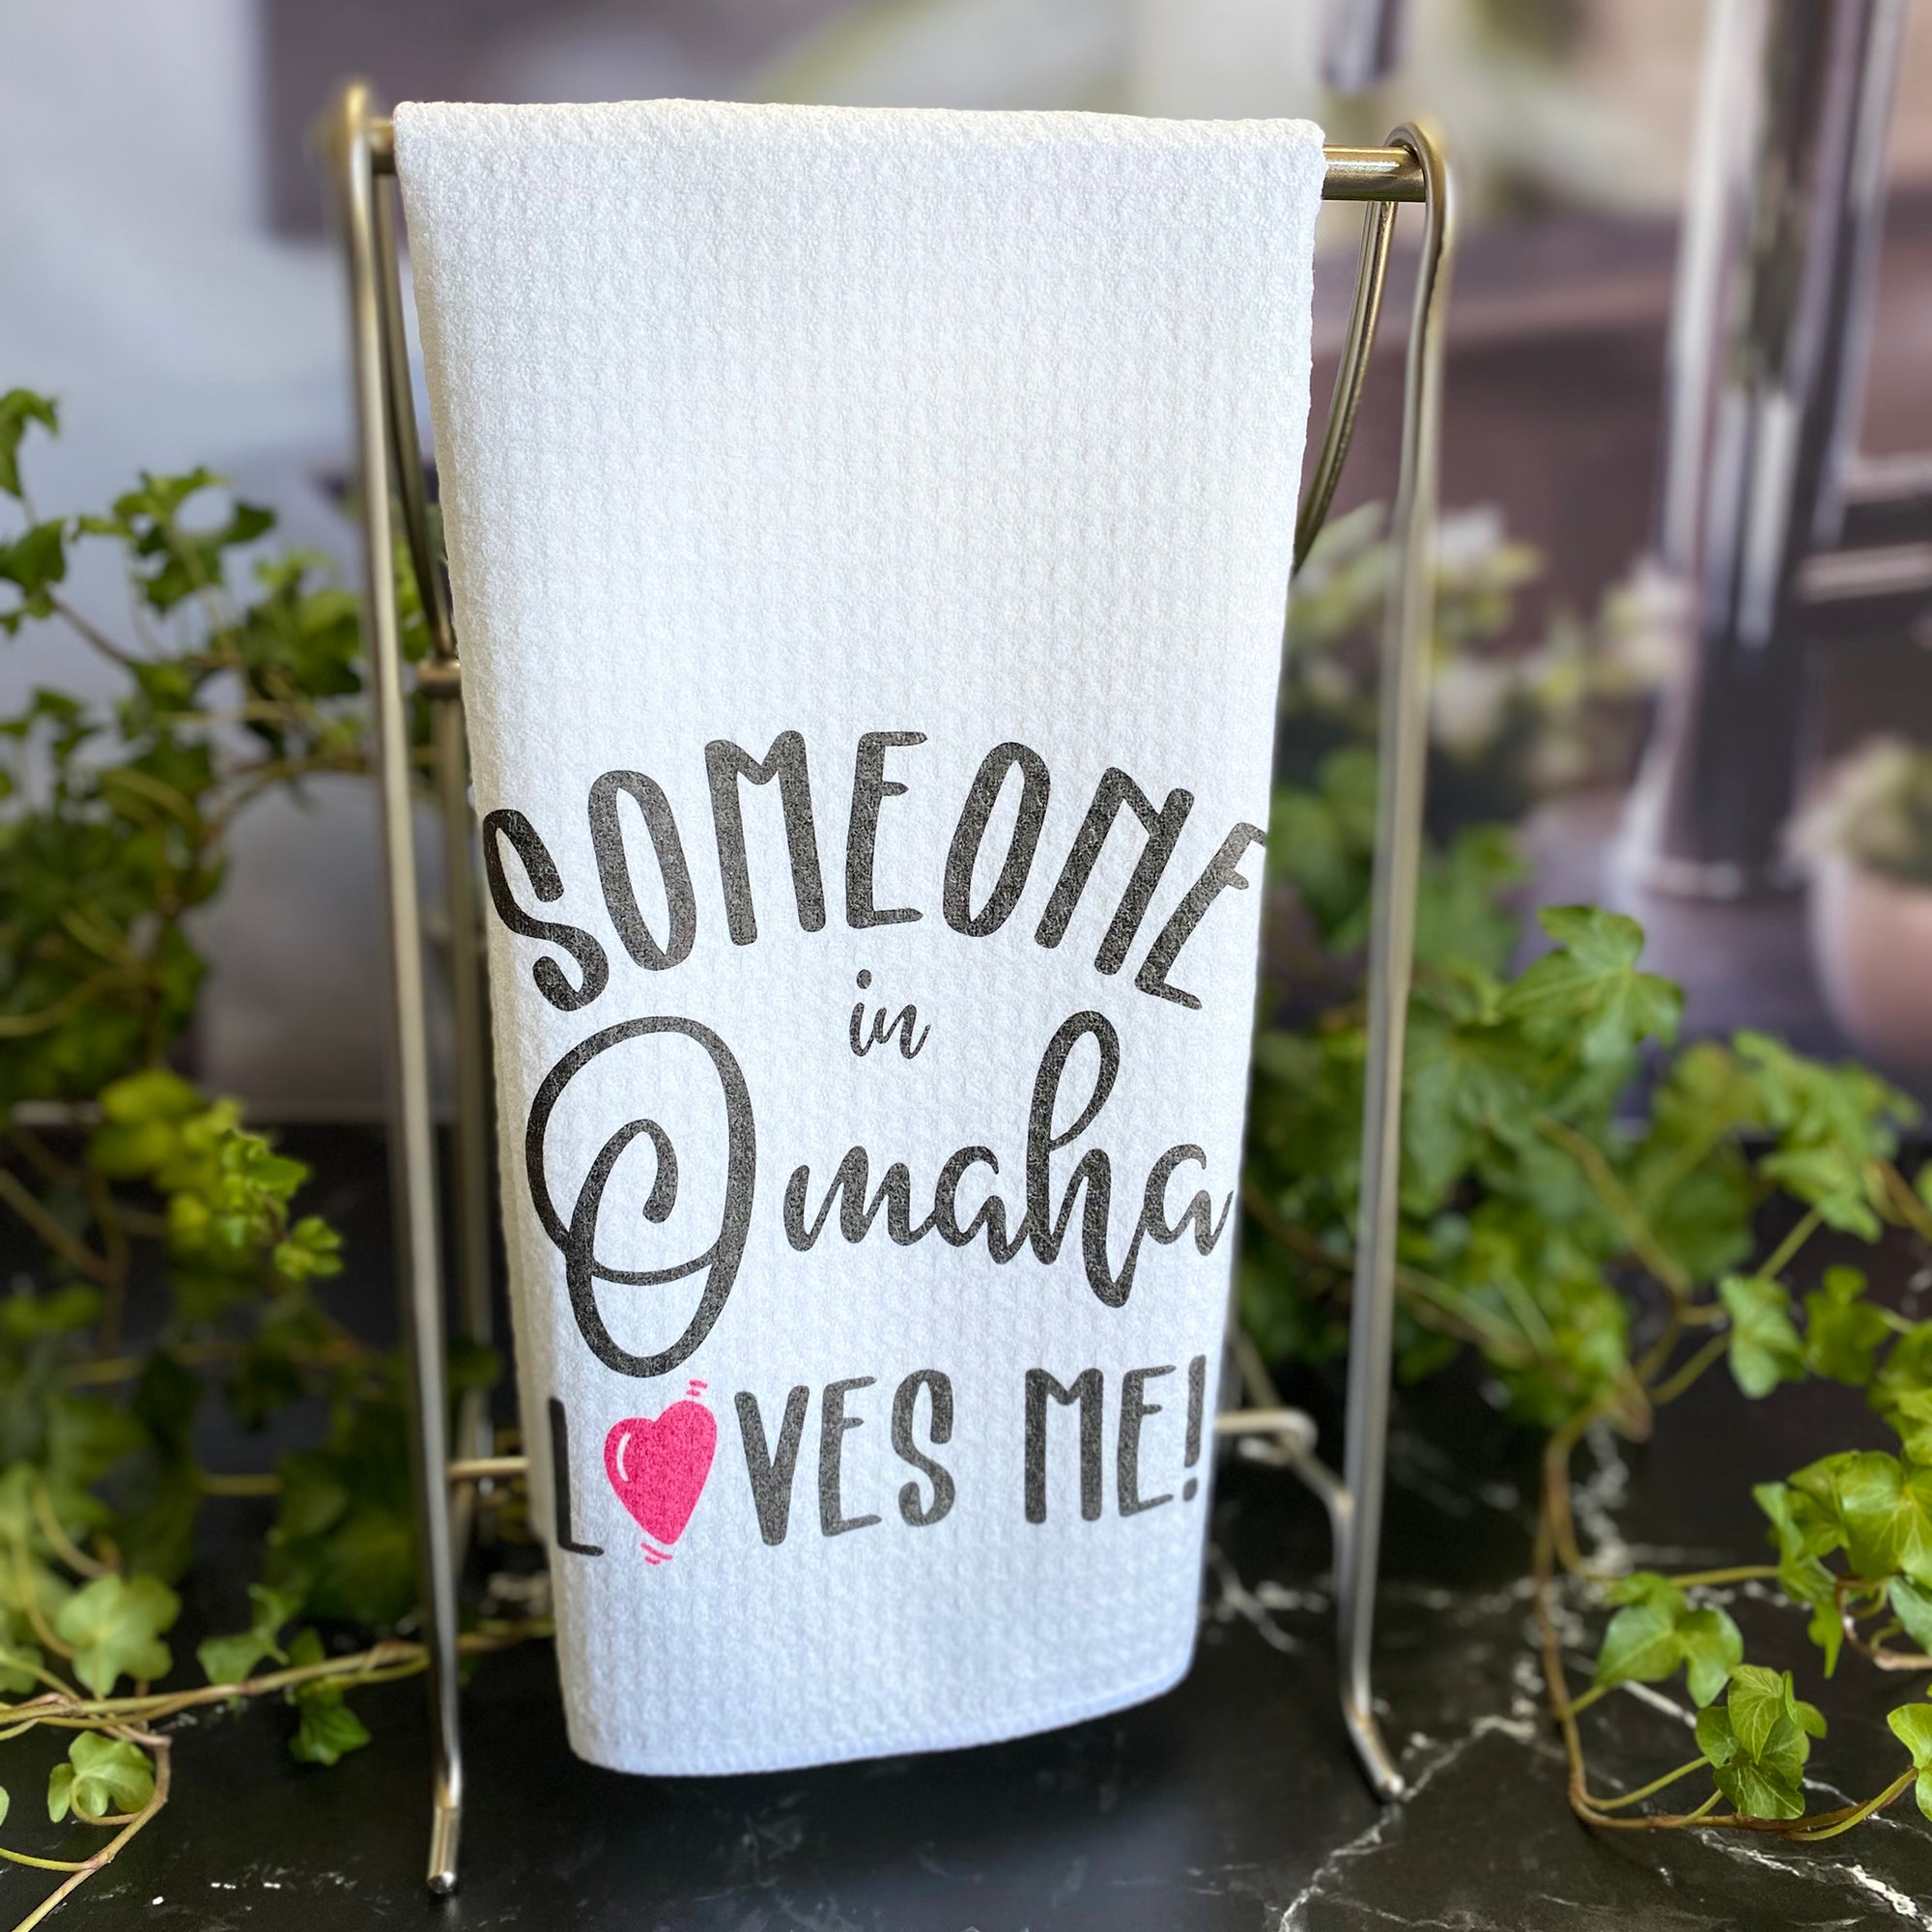 Someone in Omaha Loves Me! Dishtowel hanging on a silver stand surrounded by ivy.